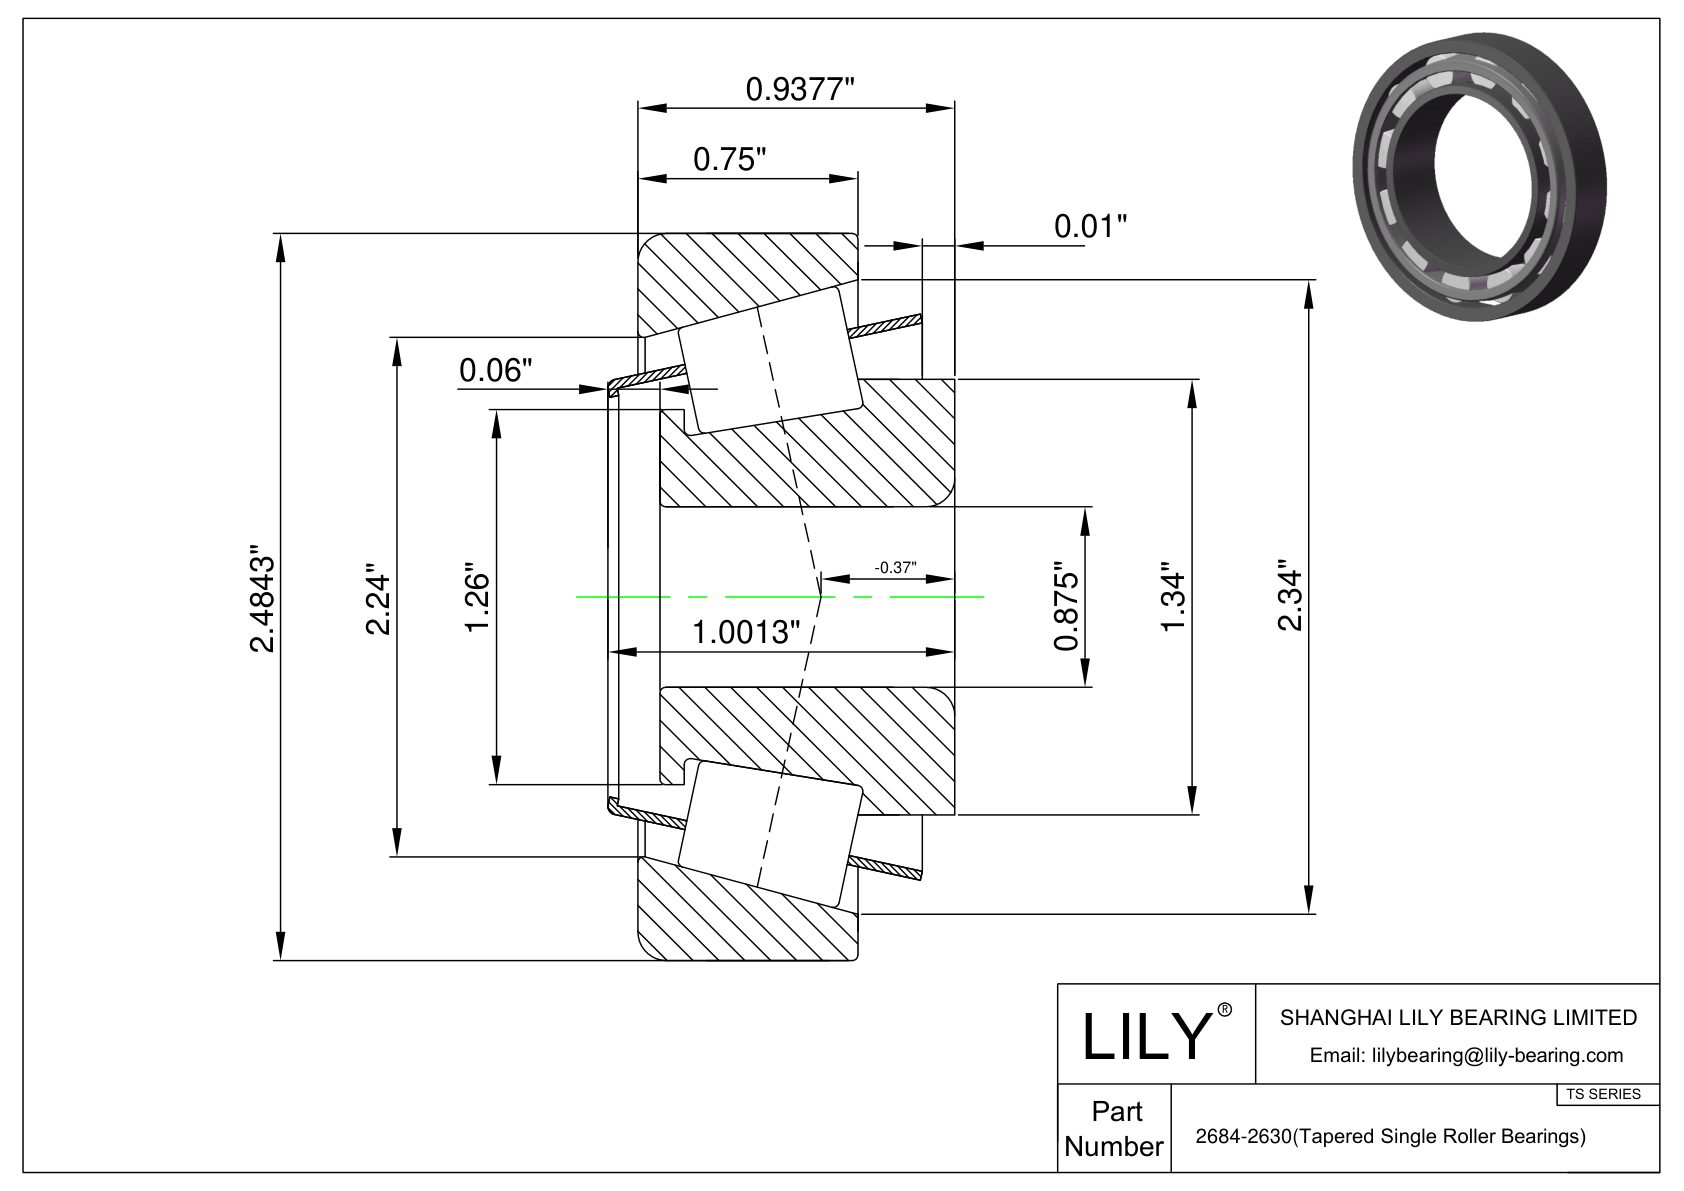 2684-2630 TS (Tapered Single Roller Bearings) (Imperial) cad drawing